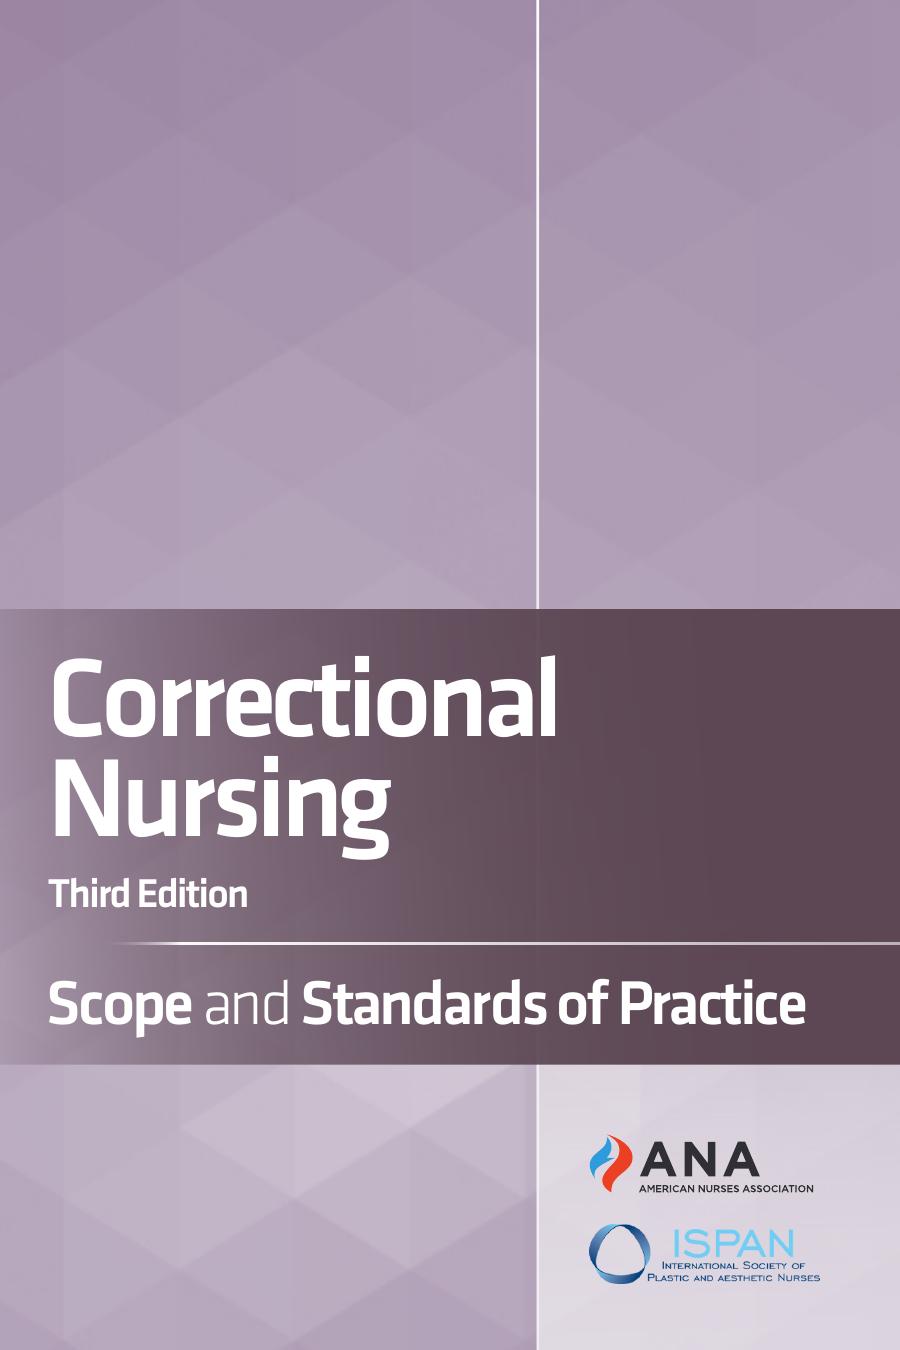 Correctional Nursing, Scope and Standards of Practice, 3E